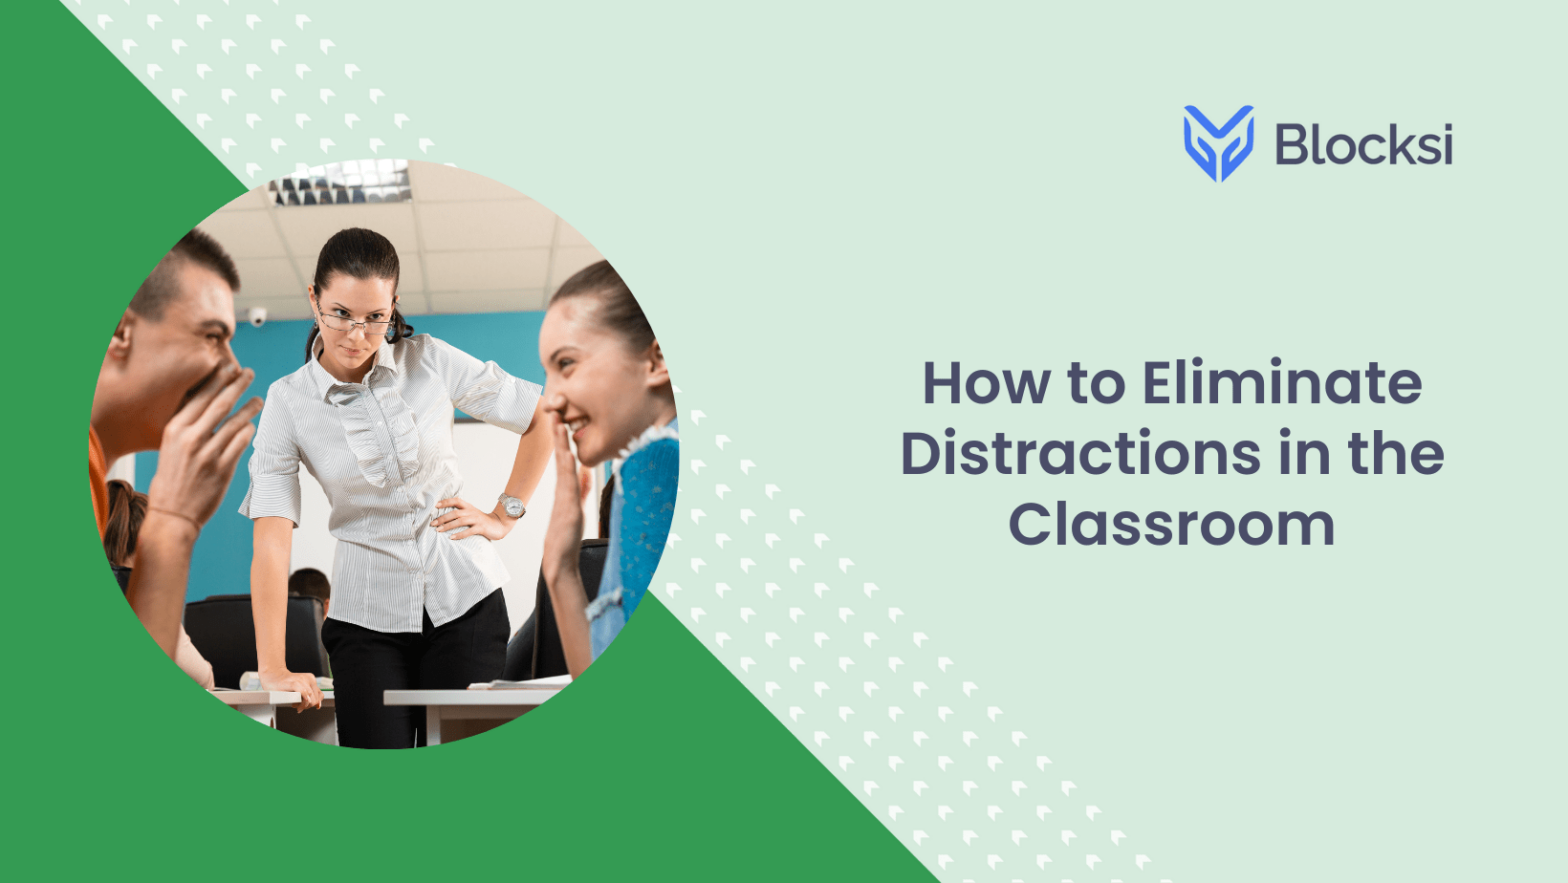 How to Eliminate Distractions in the Classroom